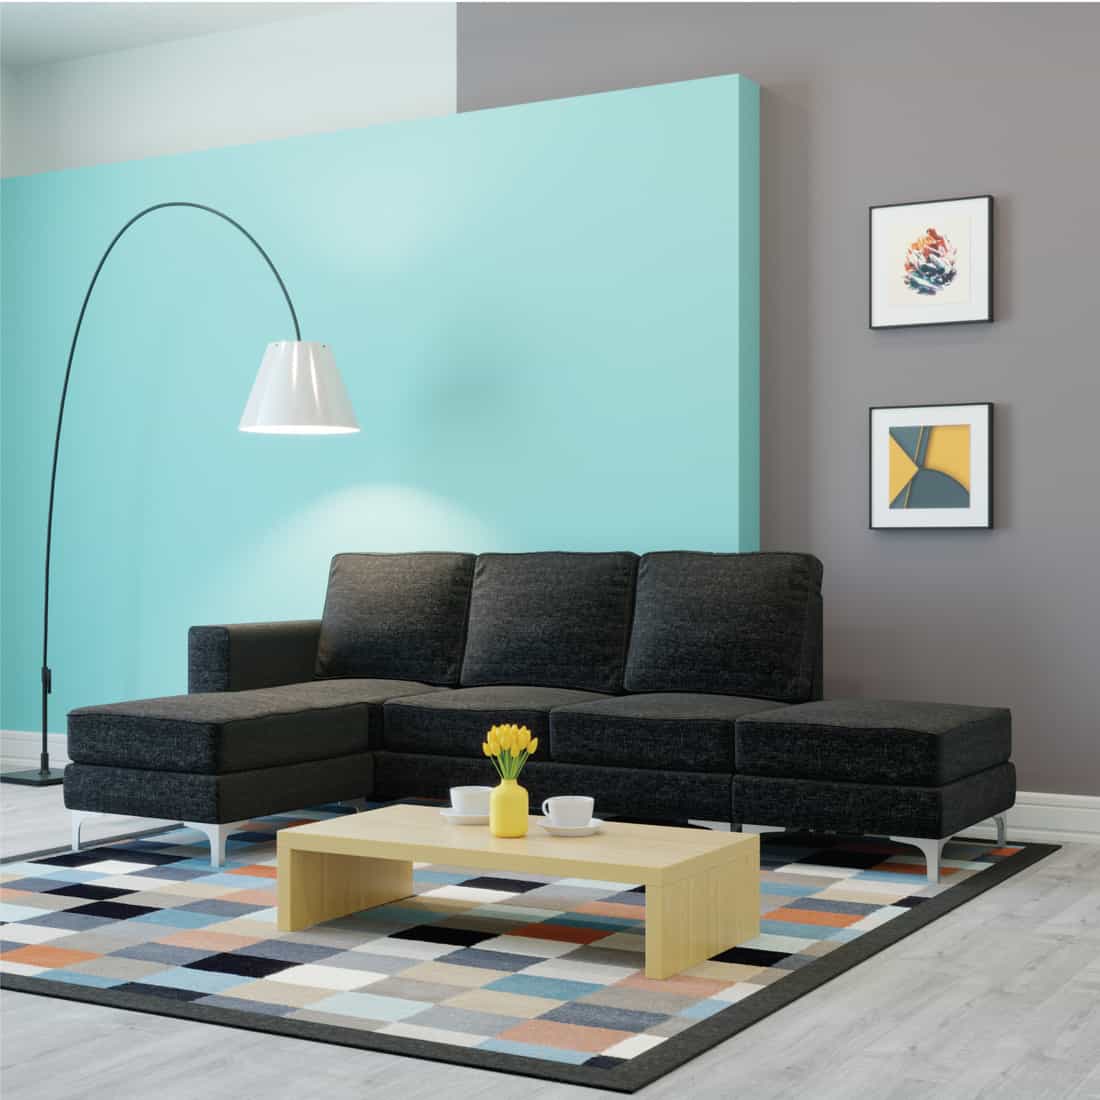 Living room in gray-blue color concept, black sofa and light blue wall behind